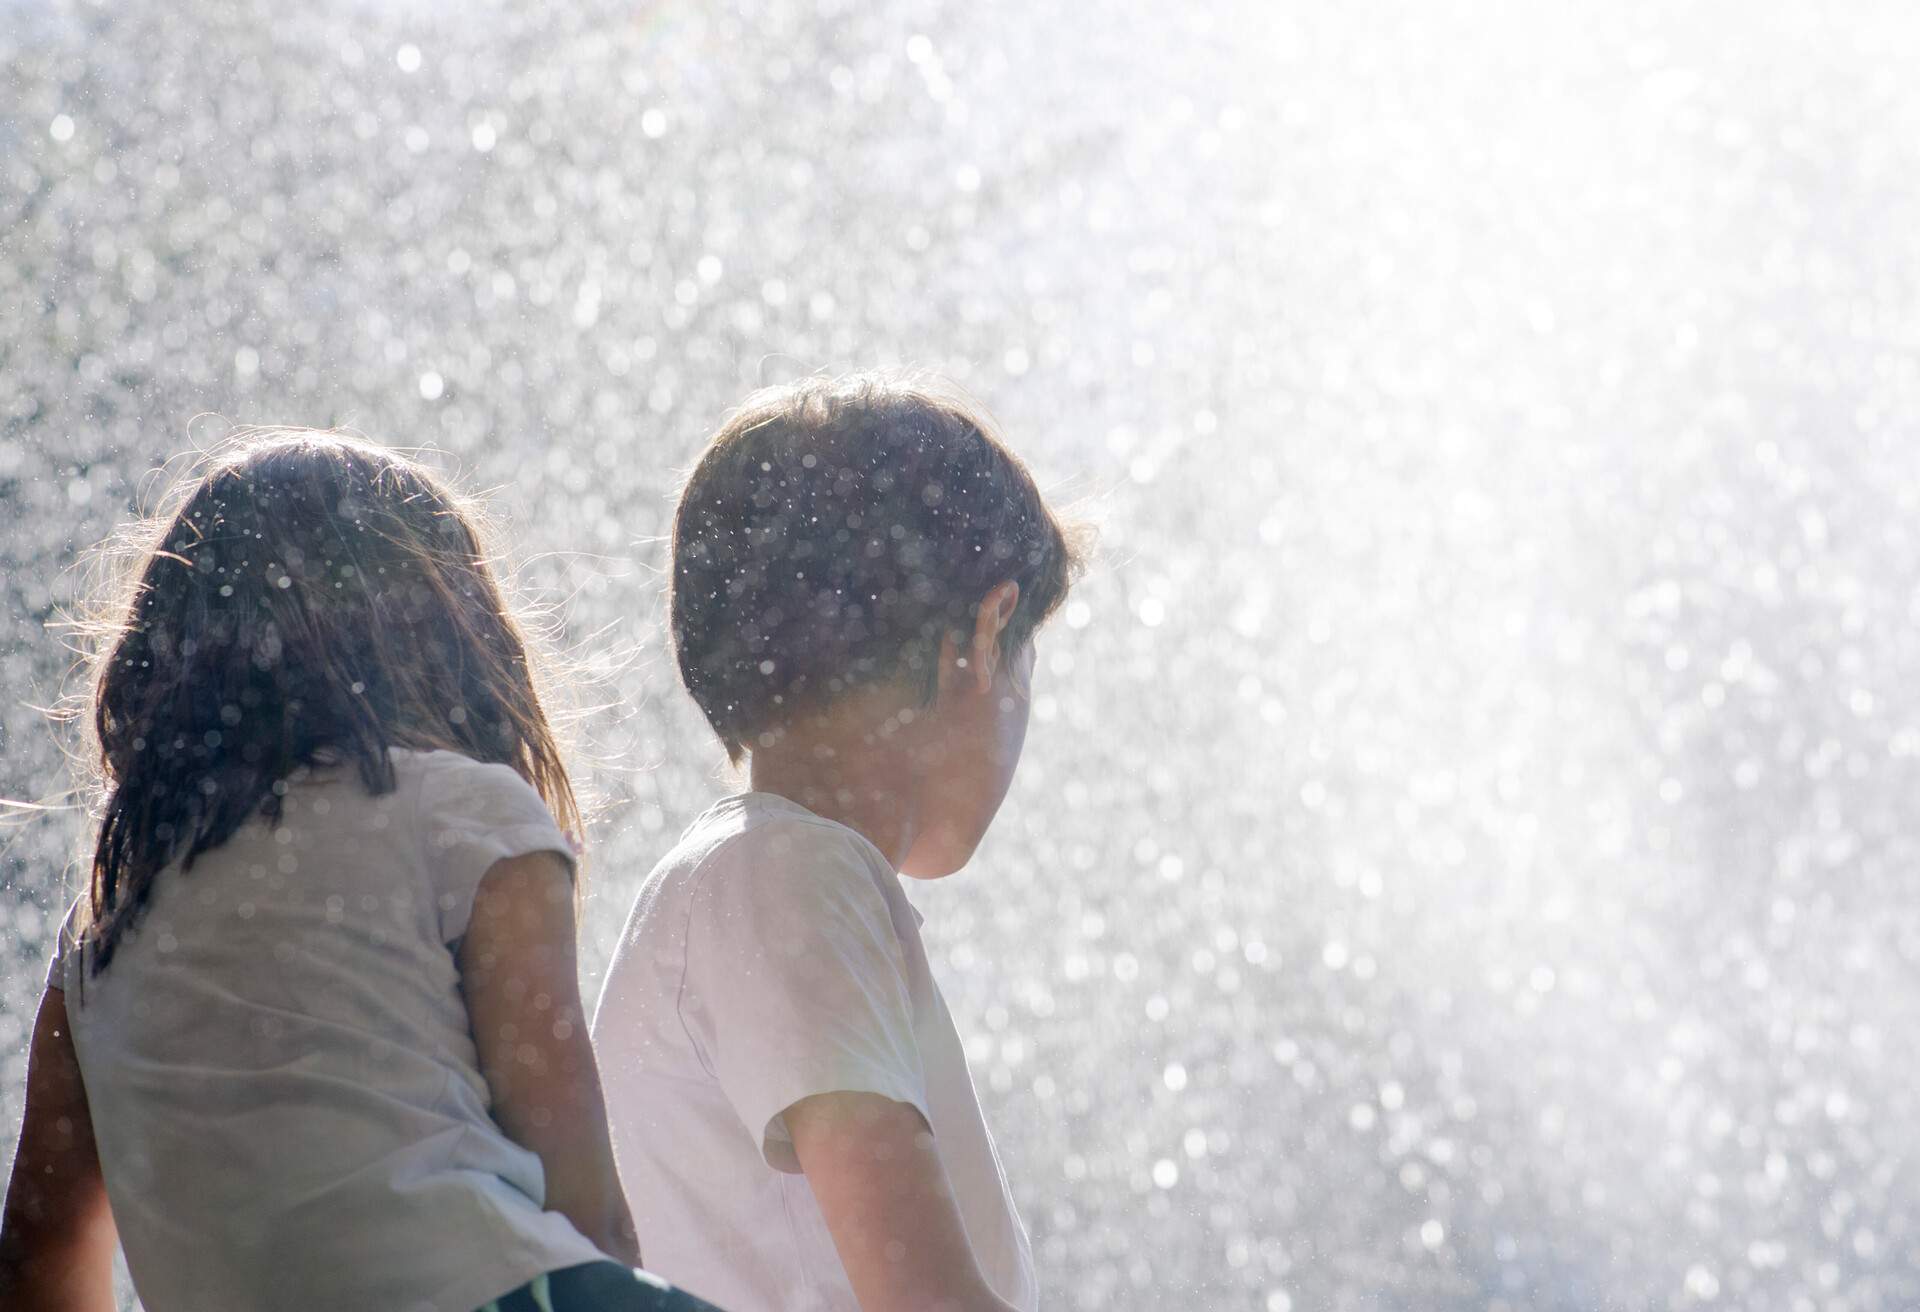 Two children in white shirts enjoying the spray of water. 